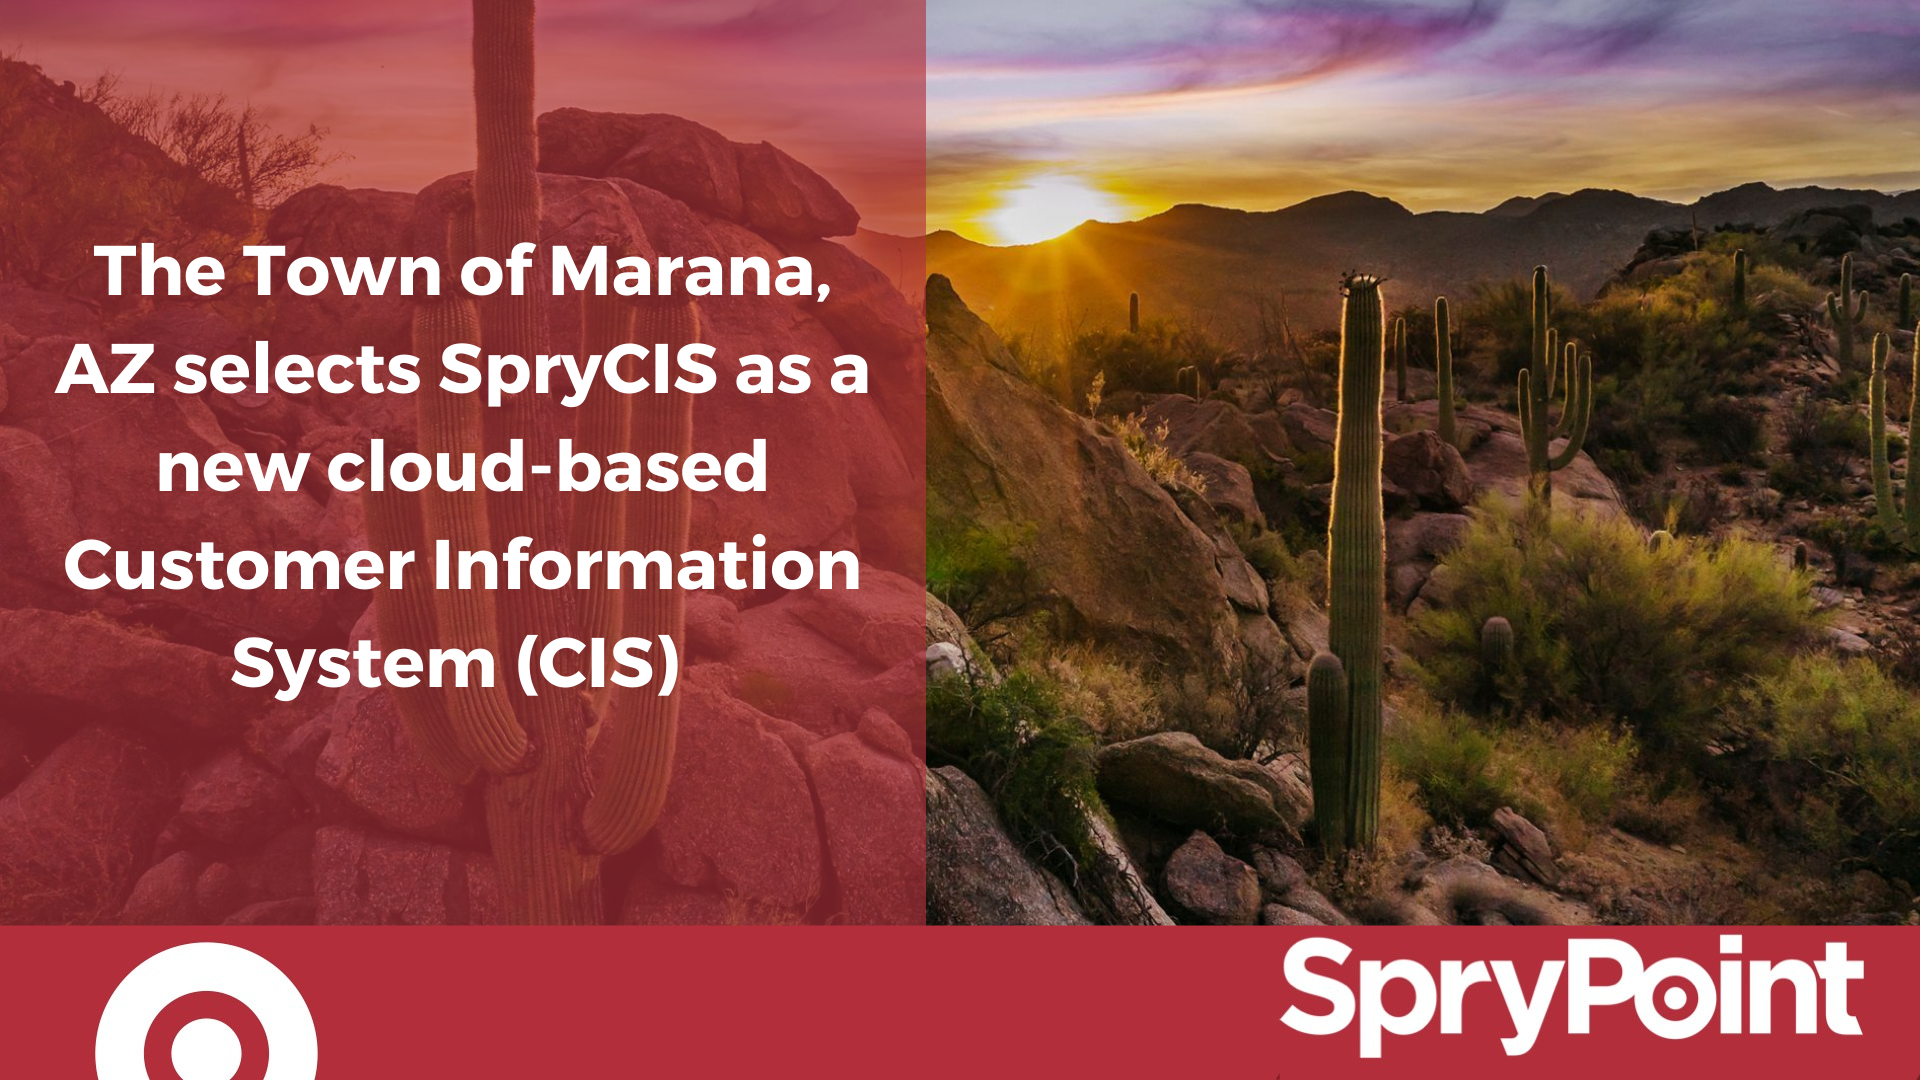 The Town of Marana, AZ selects SpryCIS as a new cloud-based Customer Information System (CIS) 